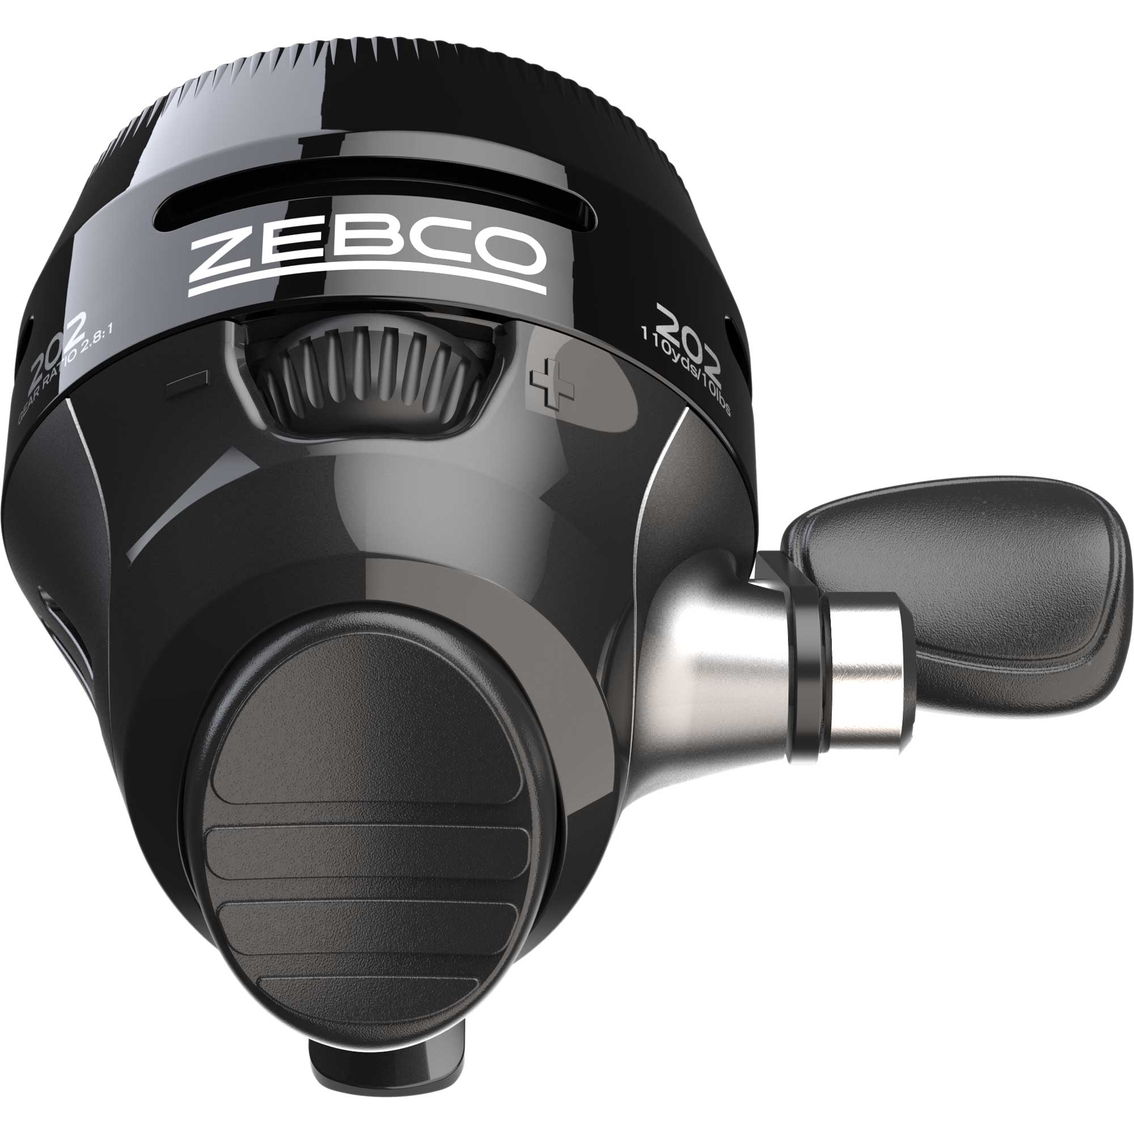 Zebco 202 Spin Cast Reel With 10 Lb. Line, Freshwater Rods & Reels, Sports & Outdoors